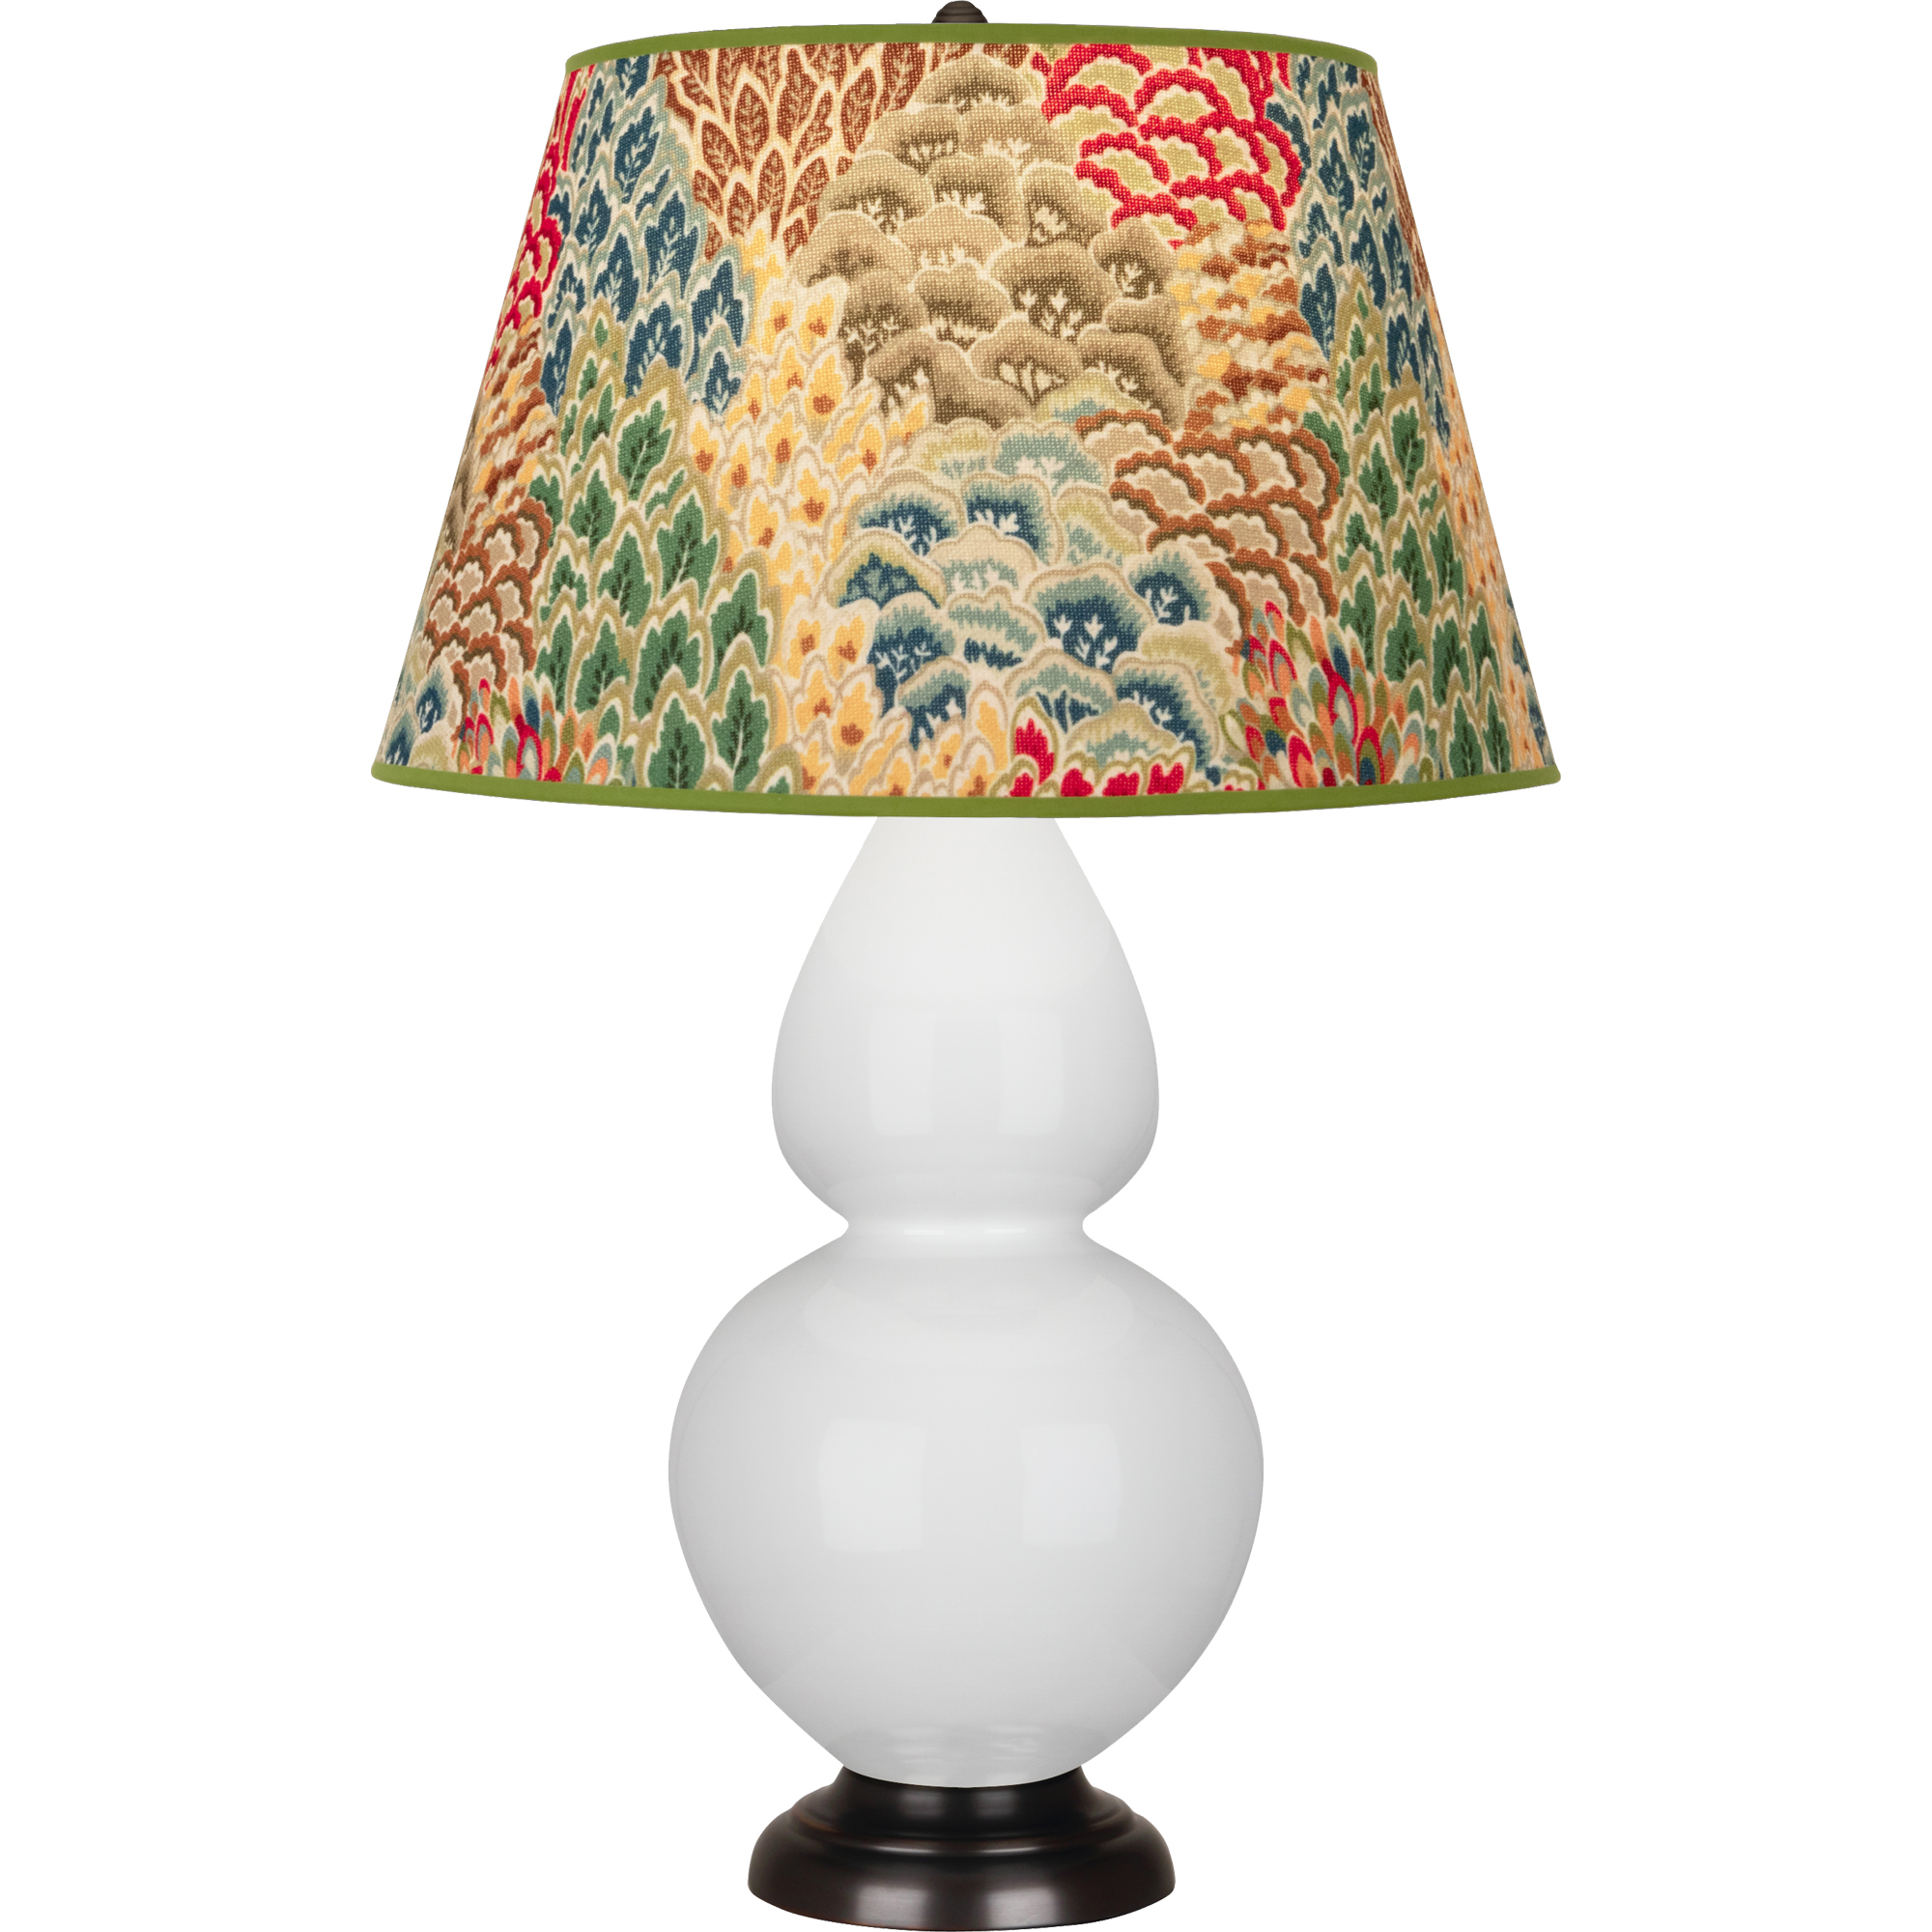 Double Gourd Table Lamp Style #1640F